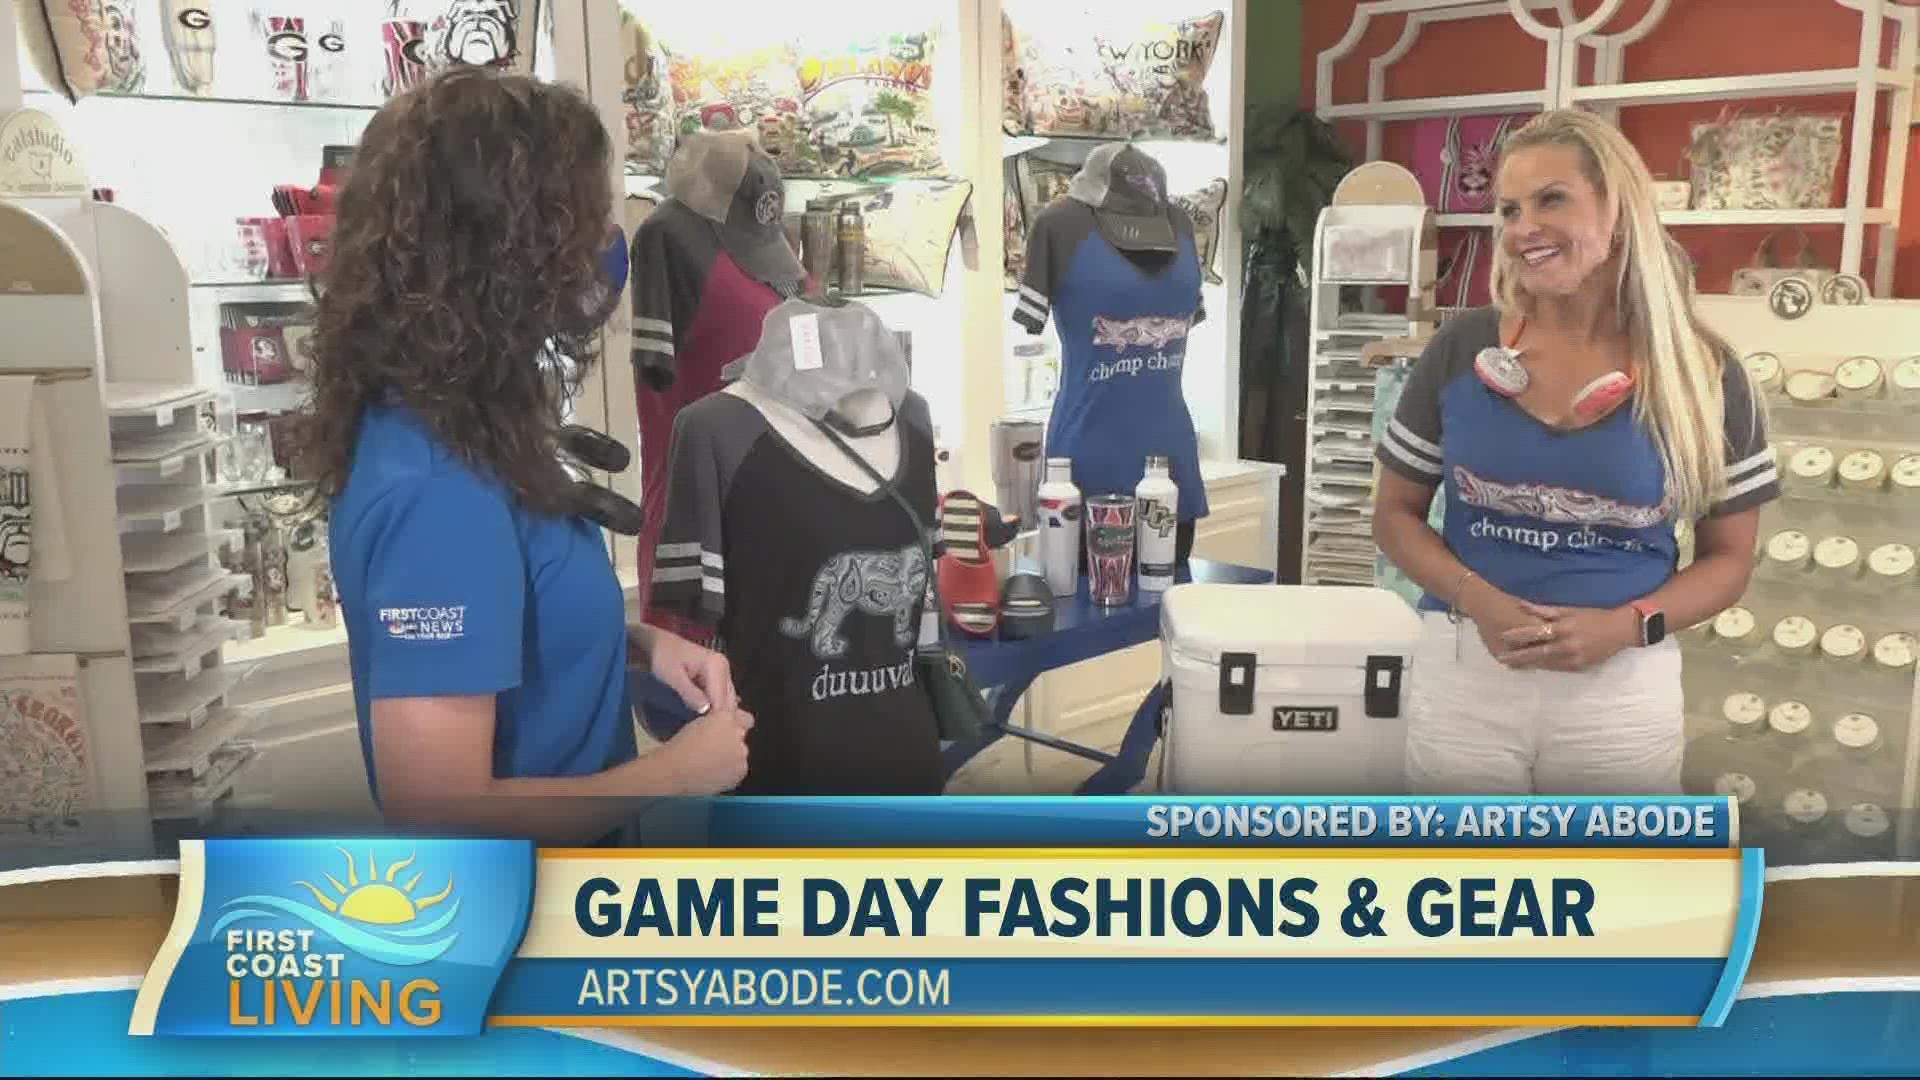 Artsy Abode carries local college football gear, as well as Jaguars gear to get you ready for the weekend!